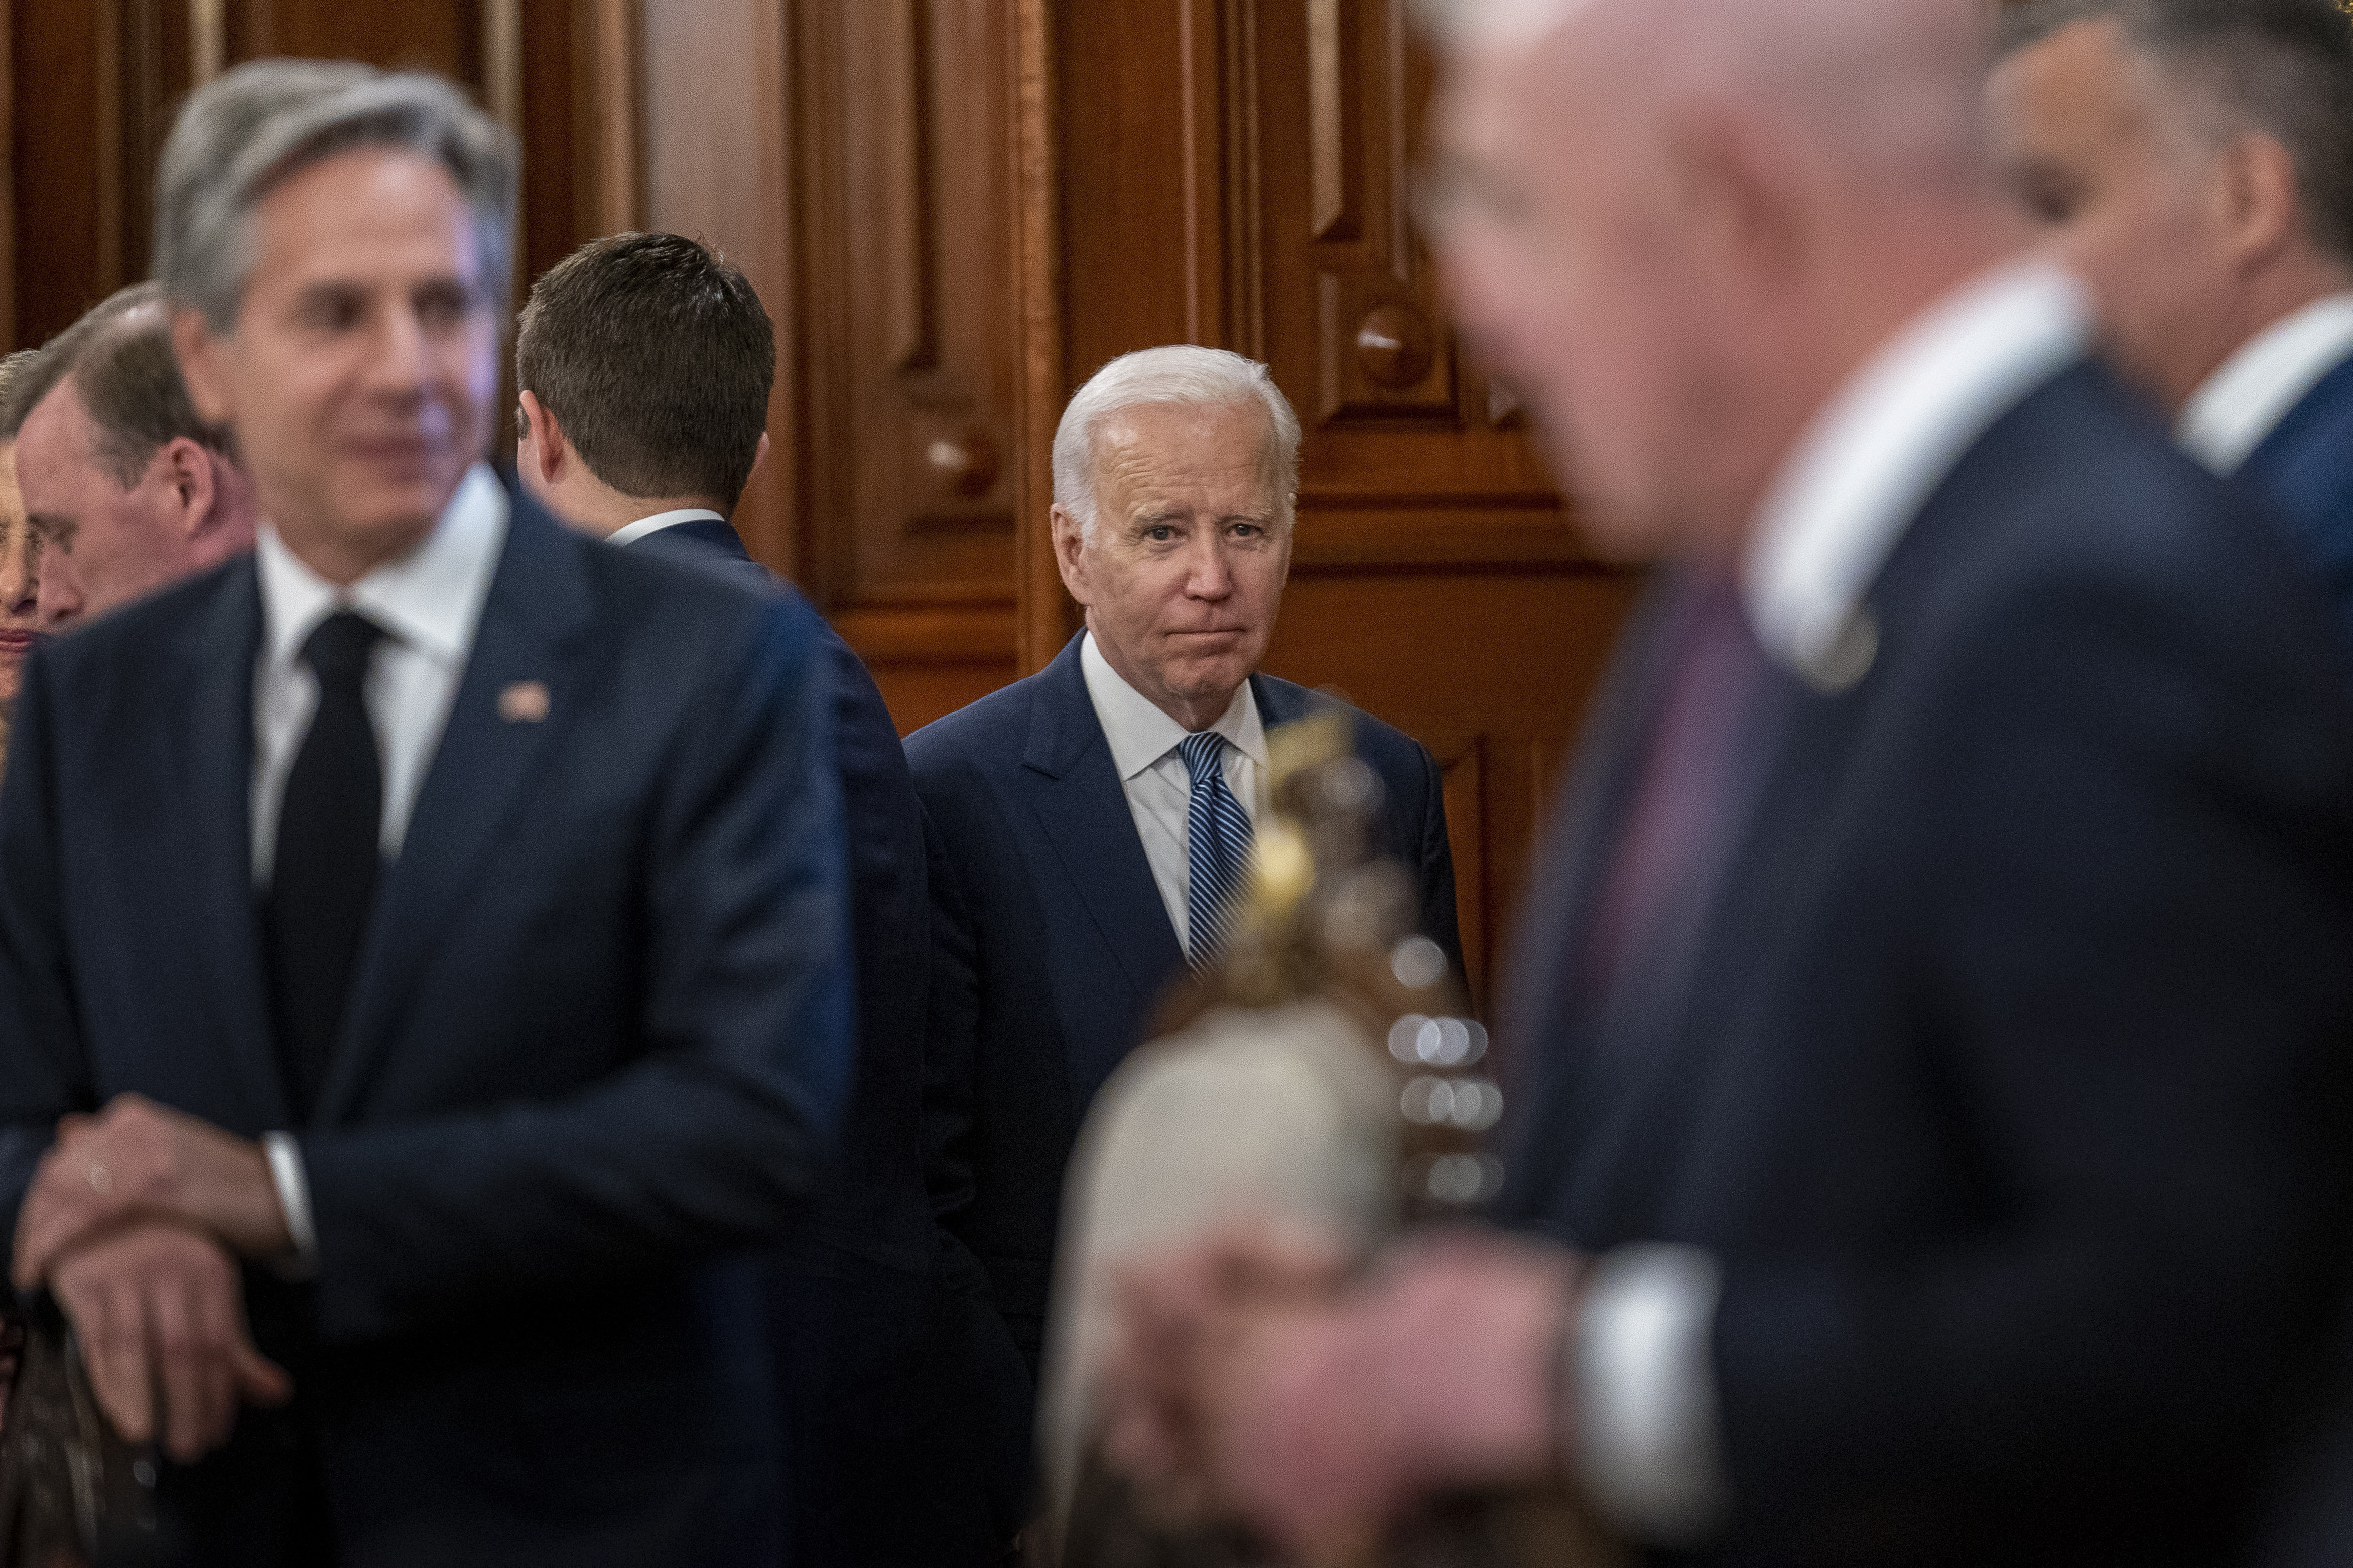 US President Joe Biden, center, accompanied by US Secretary of State Antony Blinken, left, arrives for a meeting with Mexican President Andrés Manuel López Obrador at the National Palace of Mexico City, in Mexico City, Monday, Jan. 9, 2023. (AP Photo/Andrew Harnik)